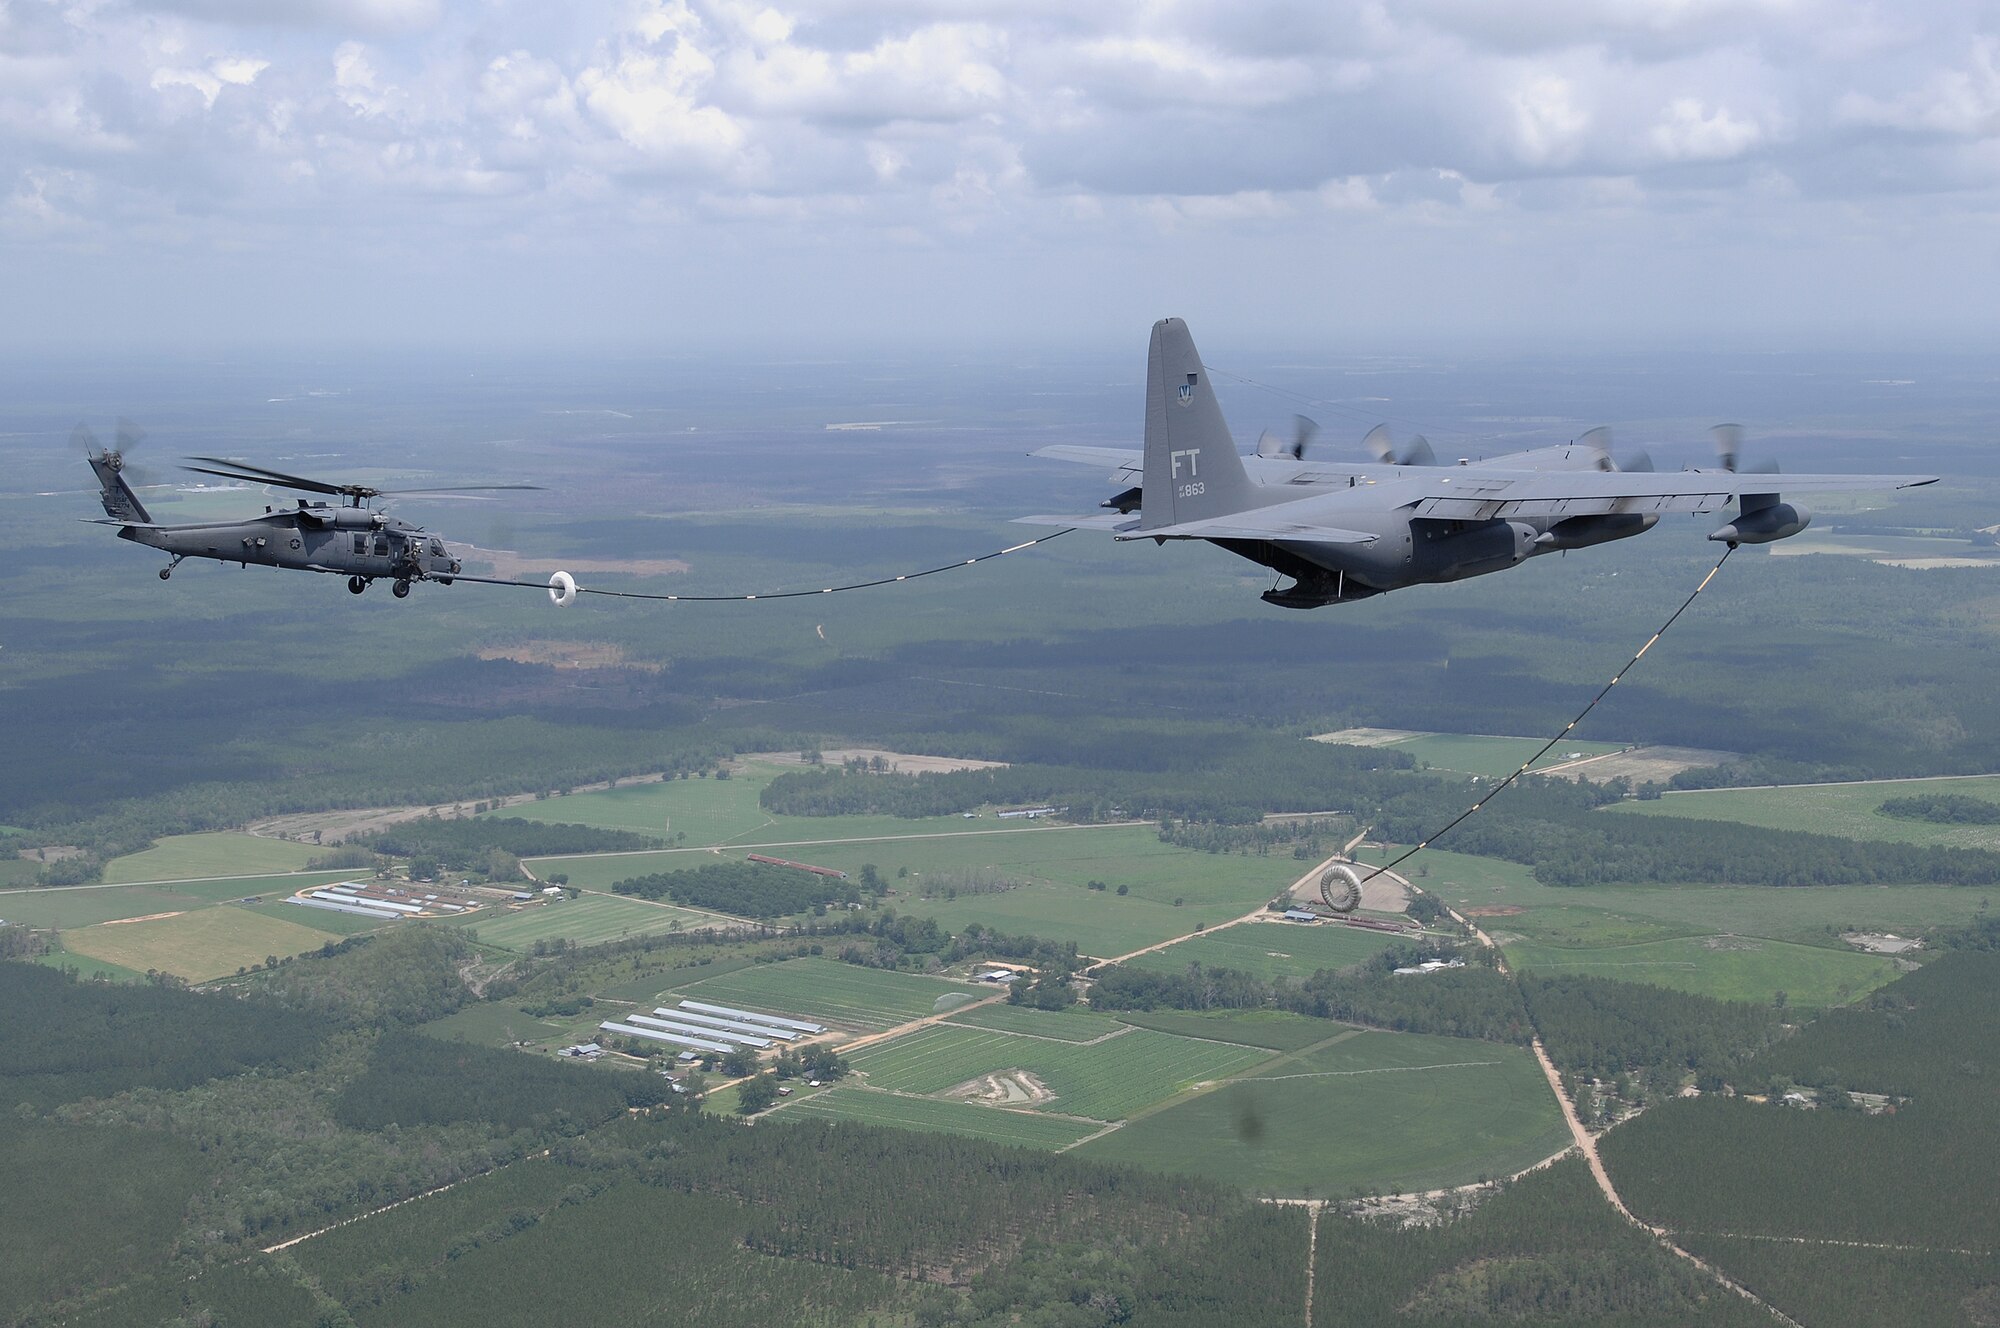 An HC-130P and an HH-60G Pave Hawk perform an aerial refueling mission June 27 in the skies over Georgia. A video production company visited Moody Air Force Base, Ga., to film a spot for the U.S. Air Force recruiting campaign, "Do Something Amazing."  The aircraft and crews are assigned to the 23rd Wing at Moody. (U.S. Air Force photo by Master Sgt. Scott Reed)